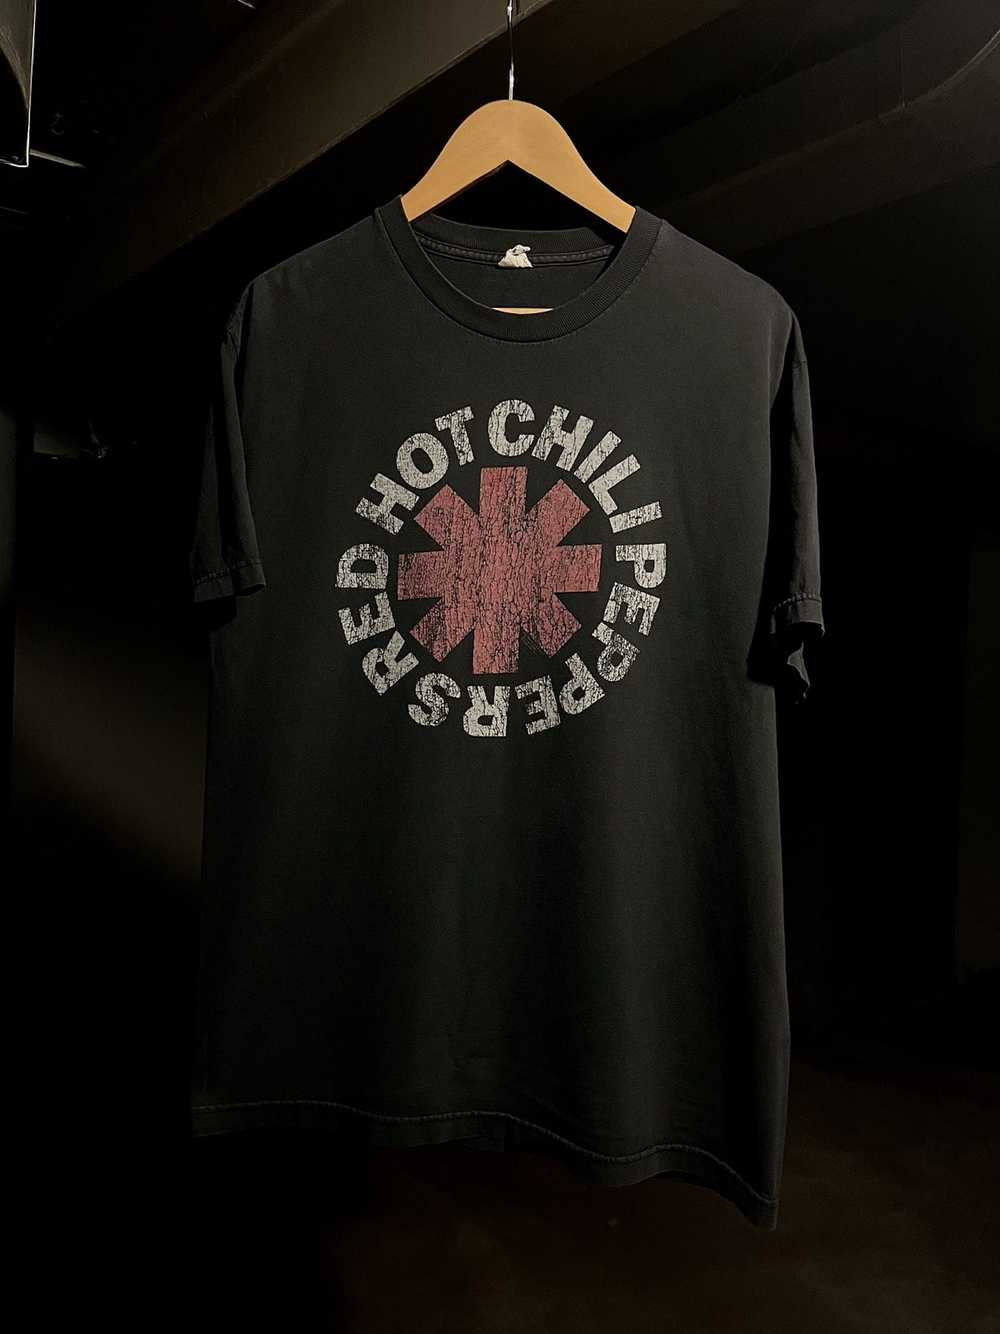 Band Tees × Rock Tees × Vintage © 2009 RED HOT CH… - image 1